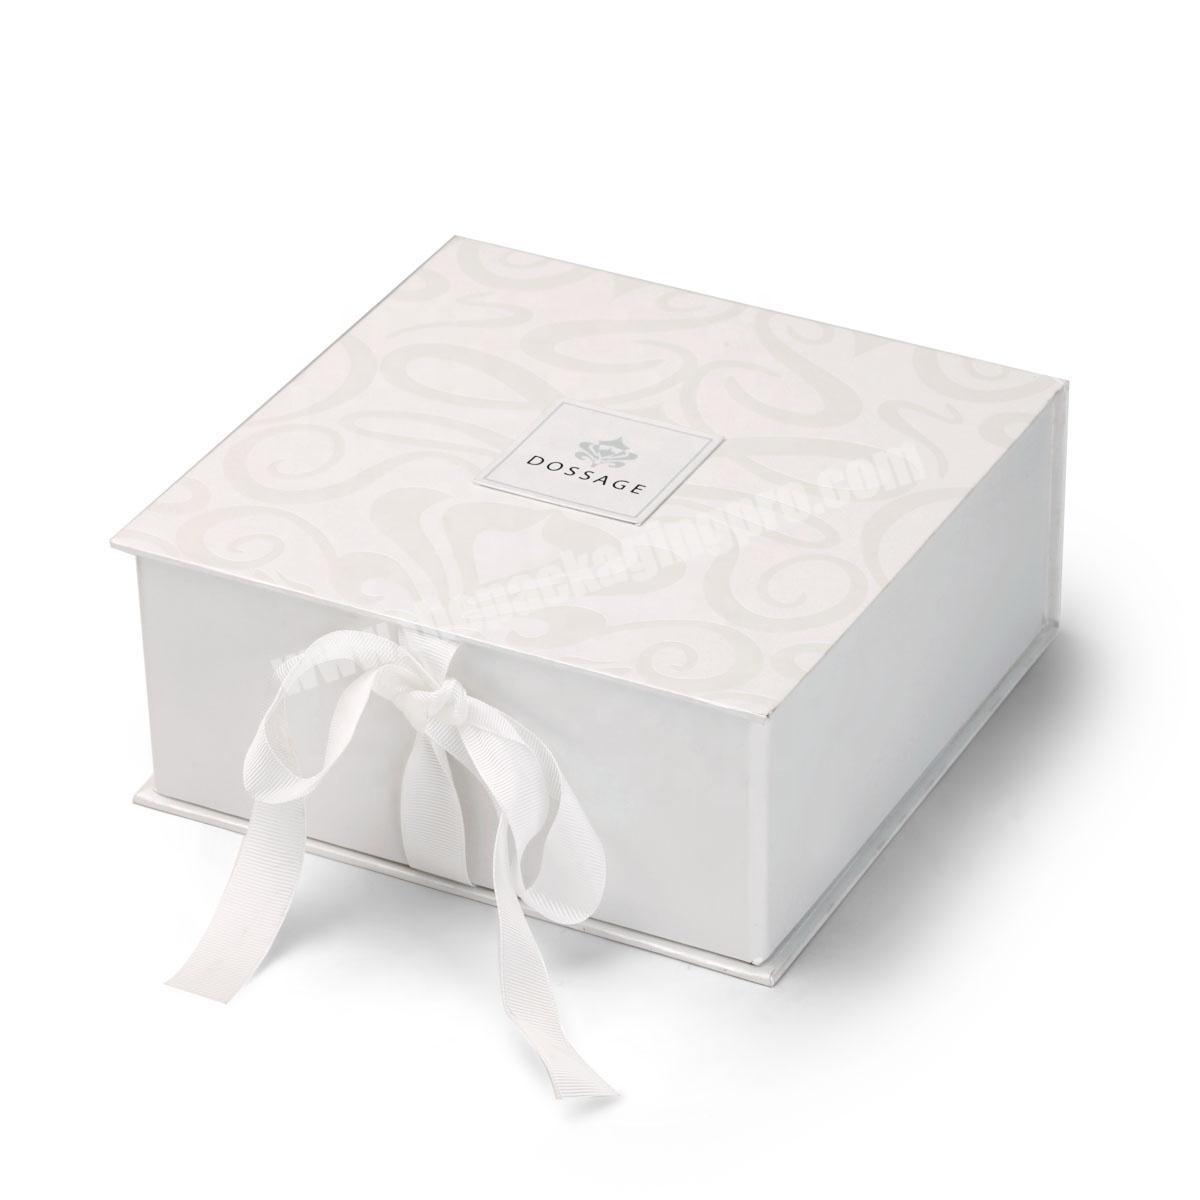 Sweet Luxury Black Packing Custom Folding Decorative Paper Packaging Gift Box With Ribbon